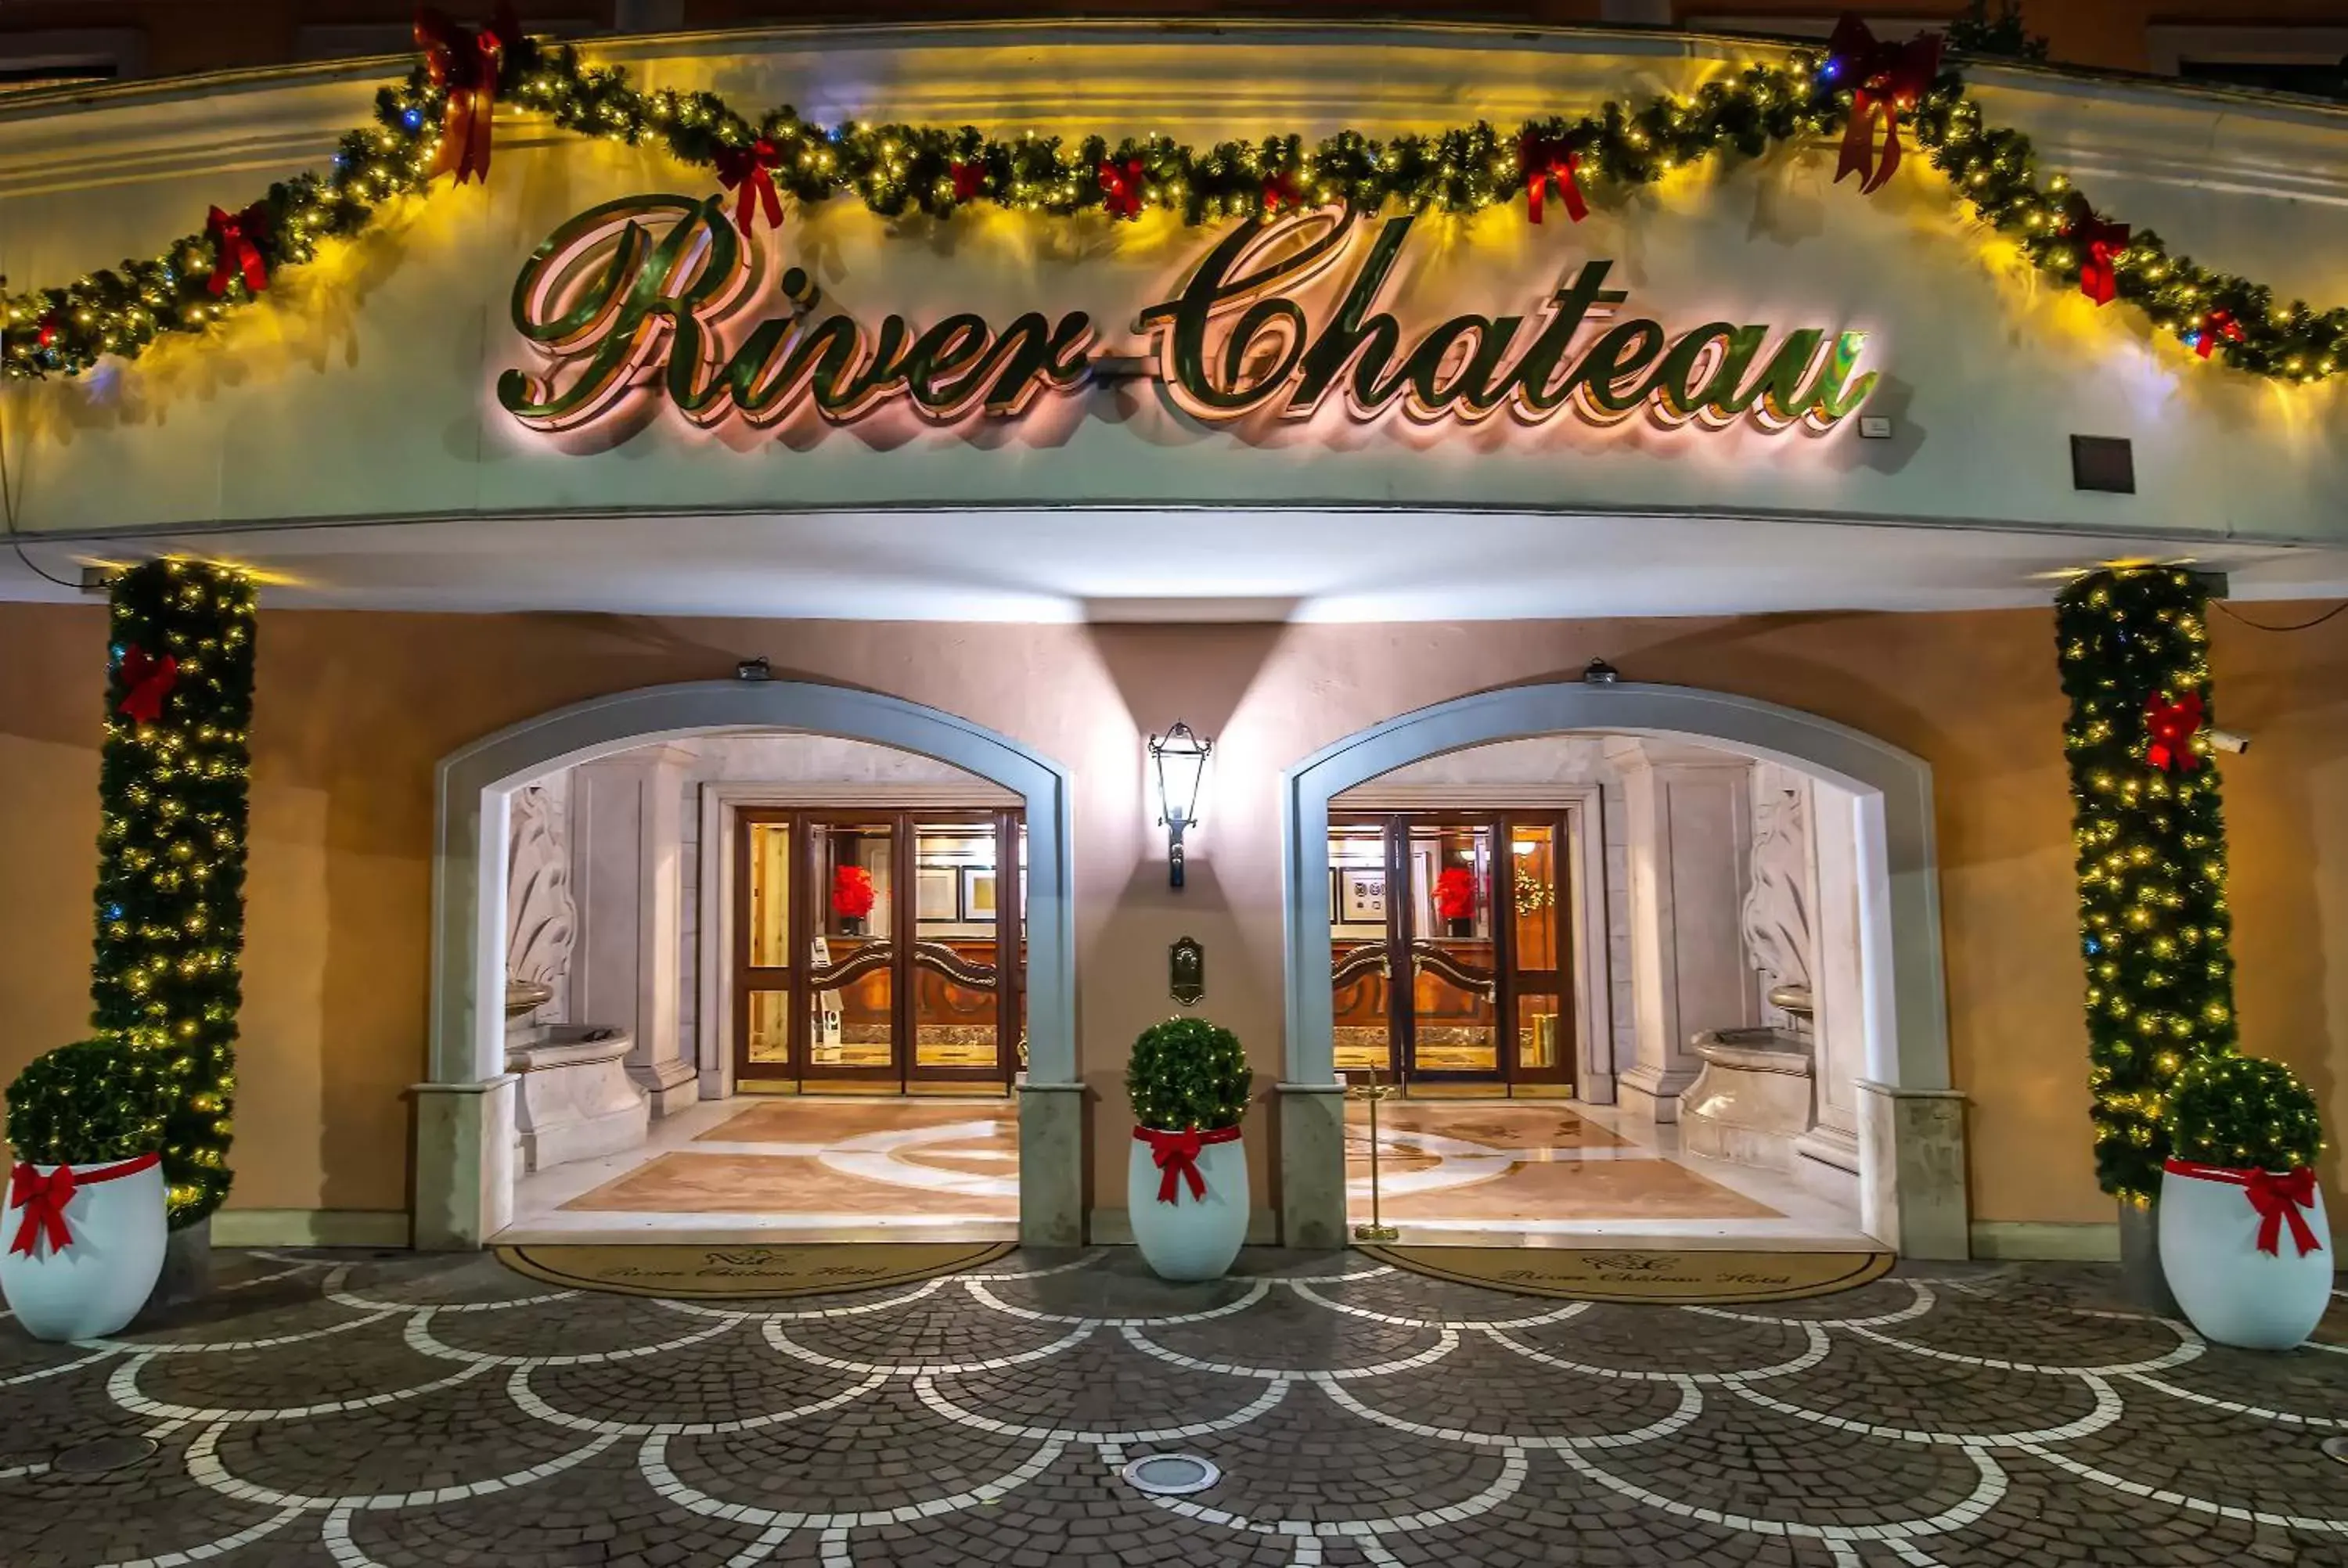 Facade/entrance in River Chateau Hotel